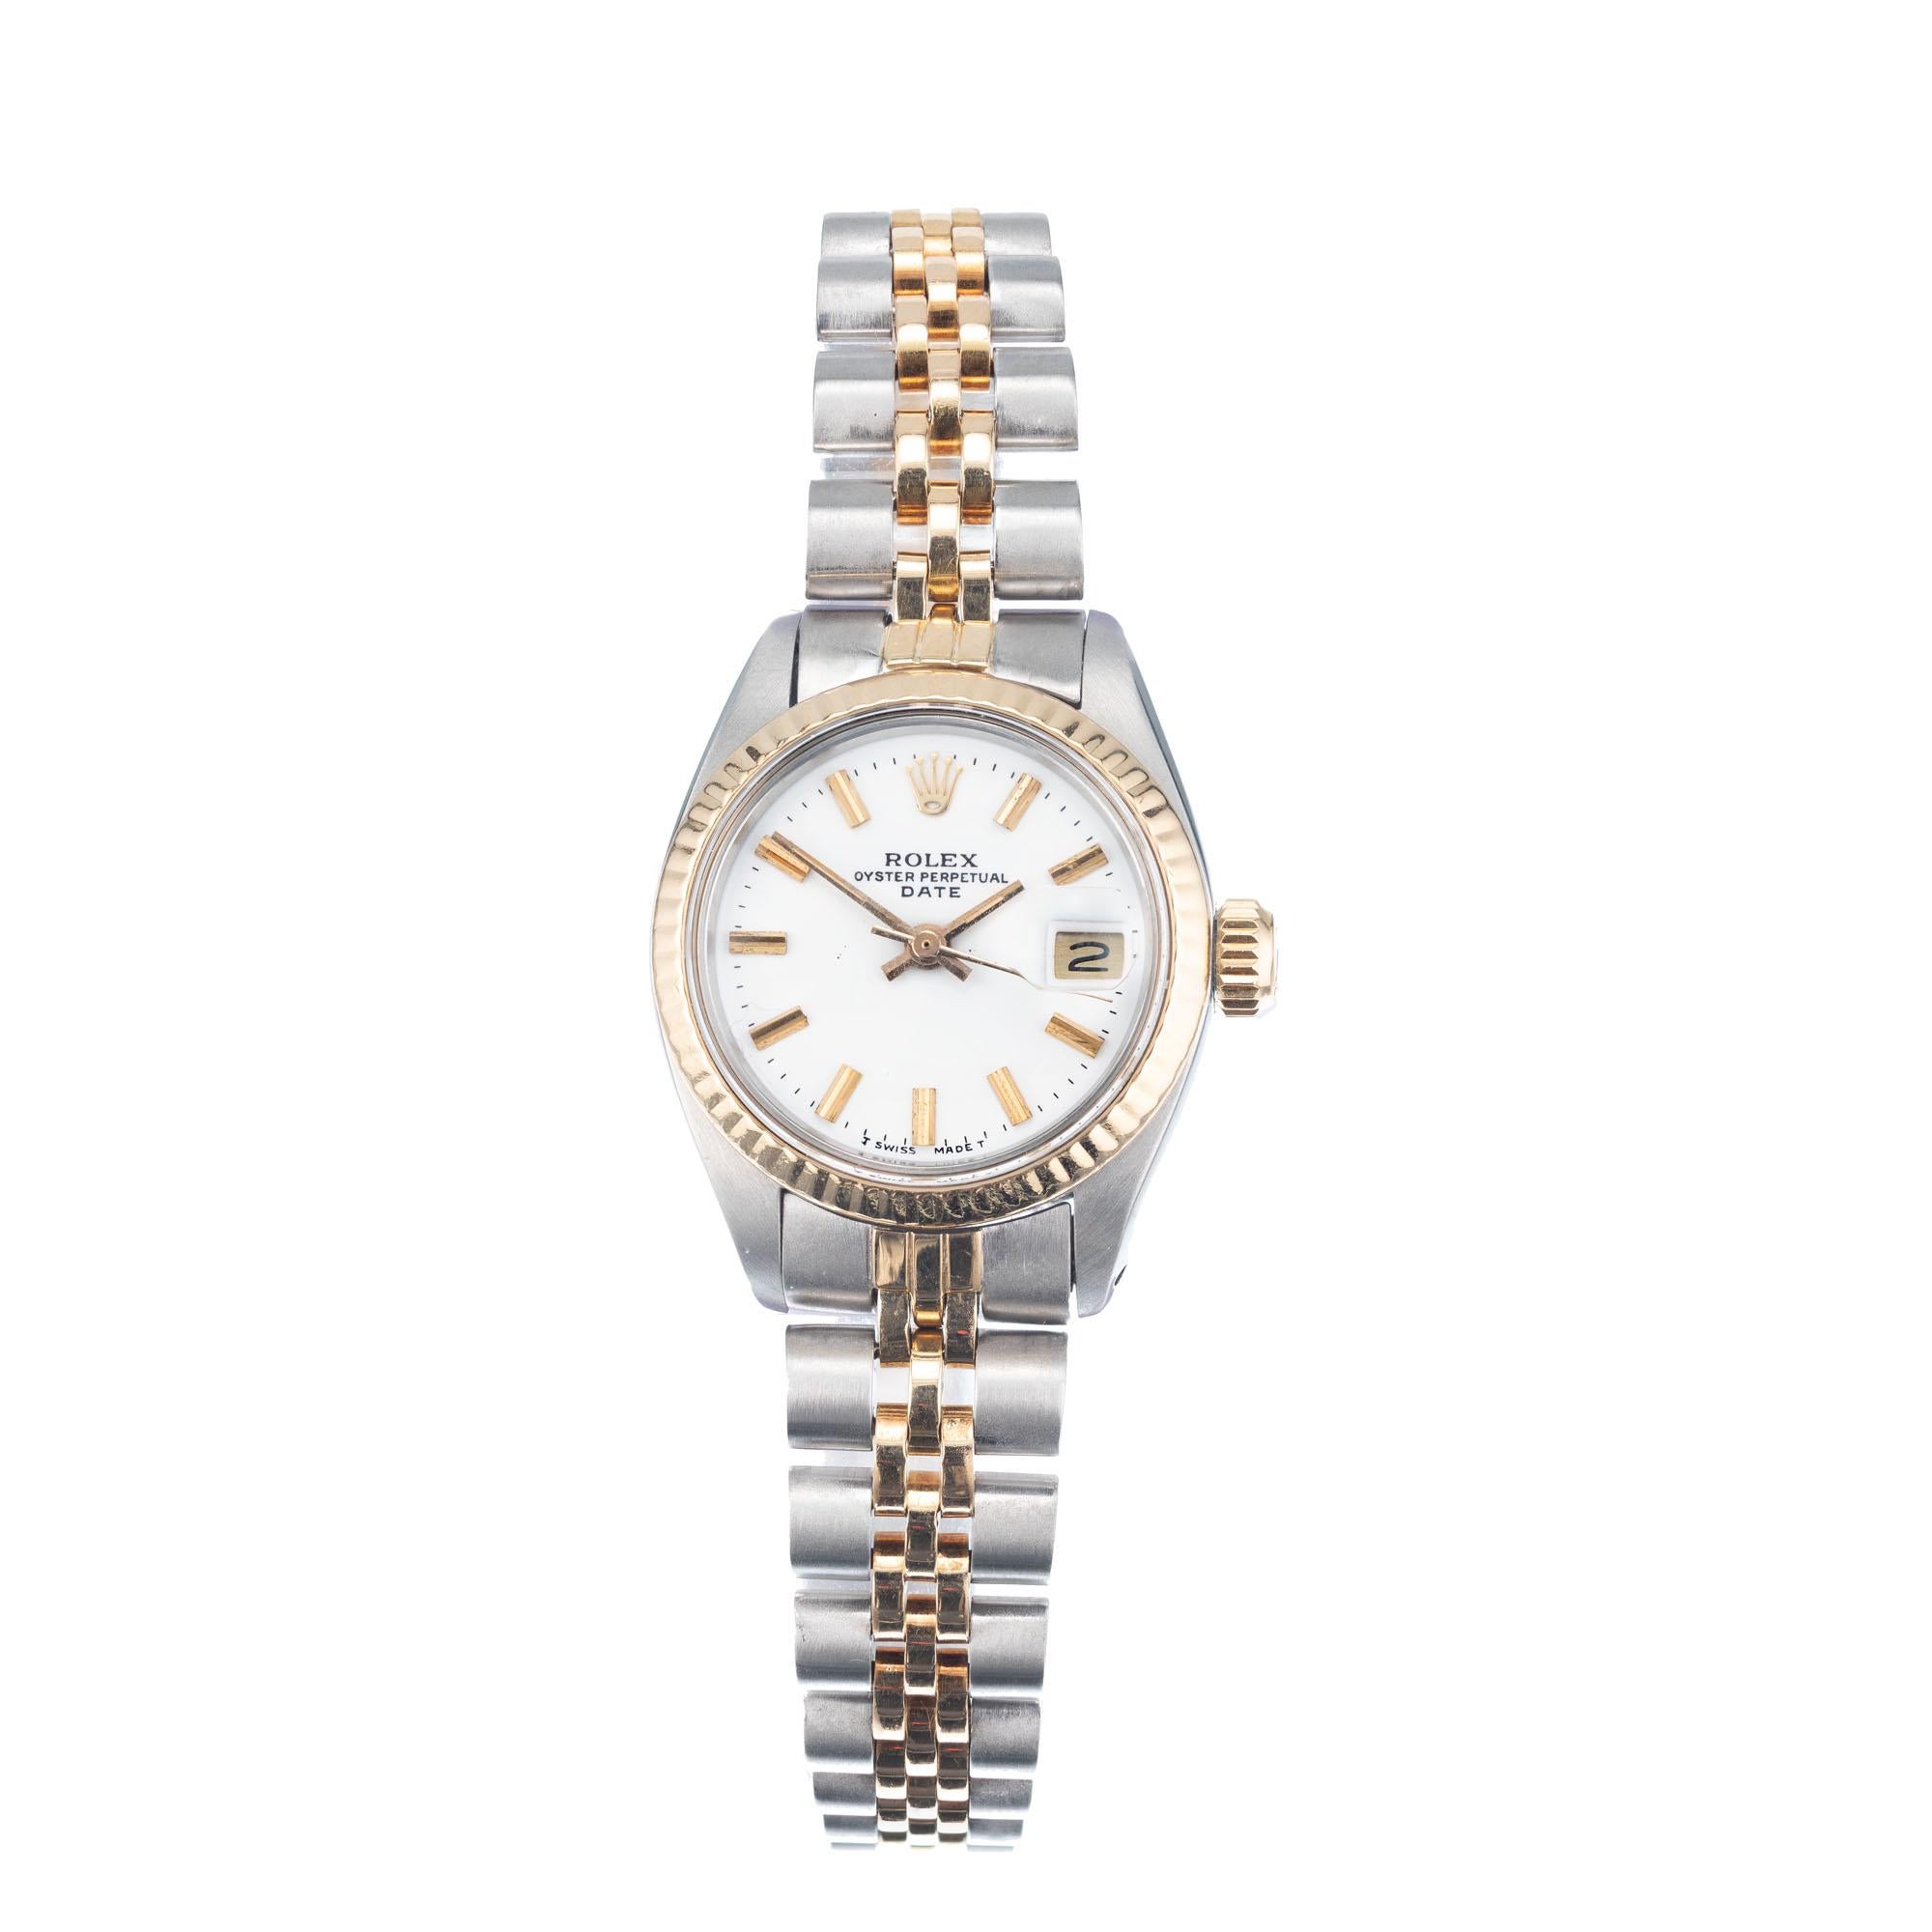 Ladies Rolex two-tone date 6917 with jubilee bracelet in 18k yellow gold and steel white dial wristwatch  Circa 1978 

Length: 32mm
Width: 26mm
Case thickness: 11.26mm
Band: two tone jubilee
Crystal: sapphire
Dial: white 
Inside case: 6900
Other: